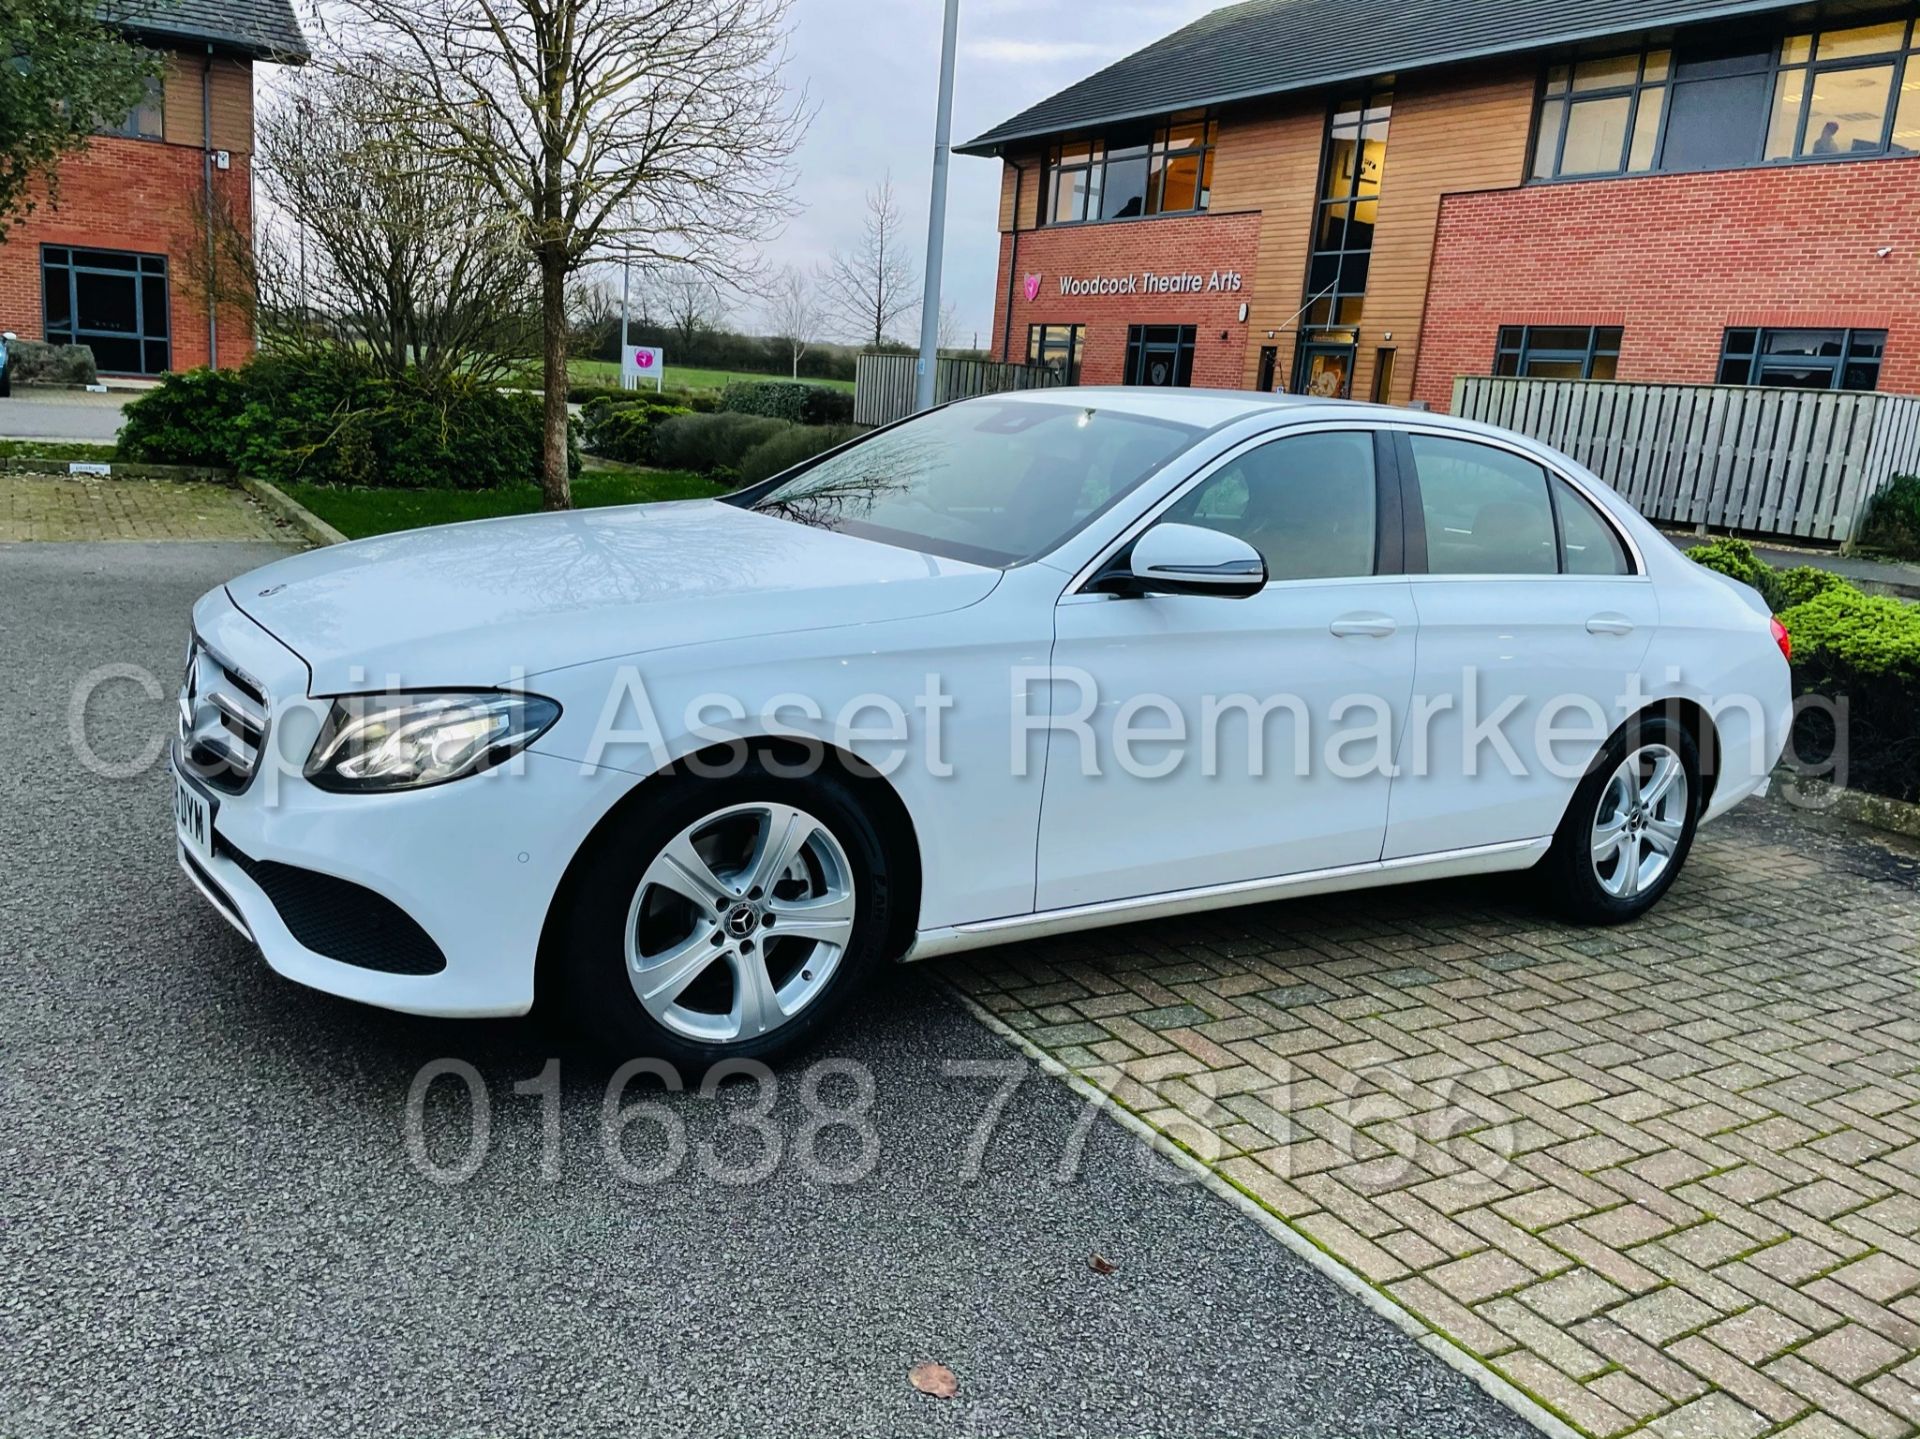 (ON SALE) MERCEDES-BENZ E220D *SALOON* (2018 - NEW MODEL) '9-G TRONIC AUTO - LEATHER - SAT NAV' - Image 7 of 50